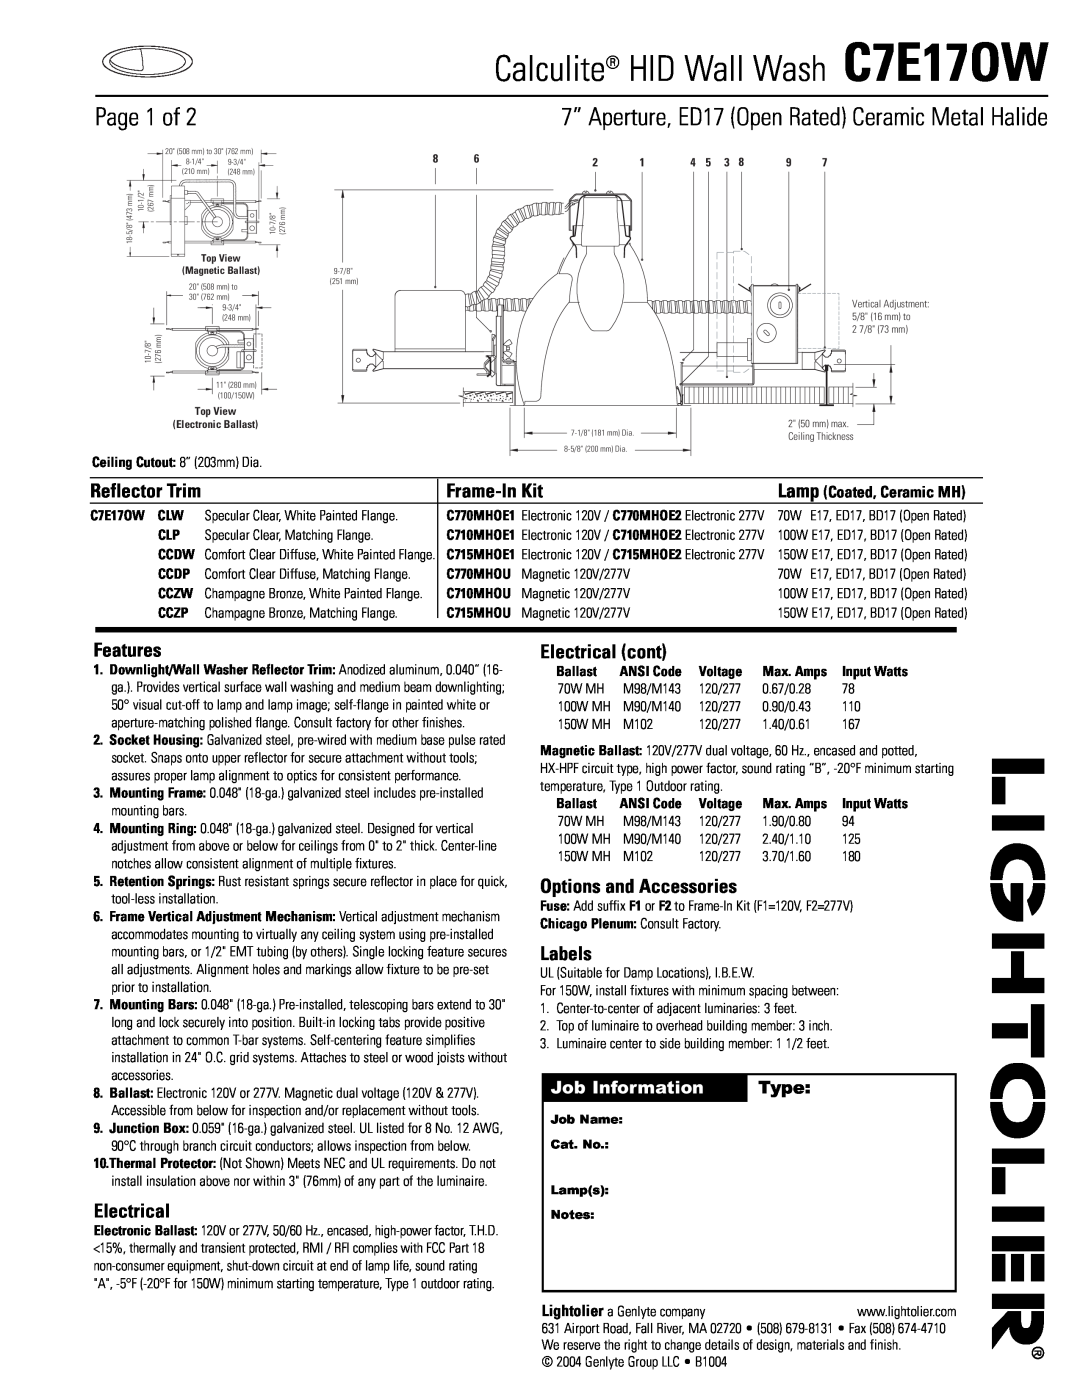 Lightolier manual Job Information, Type, Calculite HID Wall Wash C7E17OW, Page 1 of, Frame-InKit, Features, Electrical 